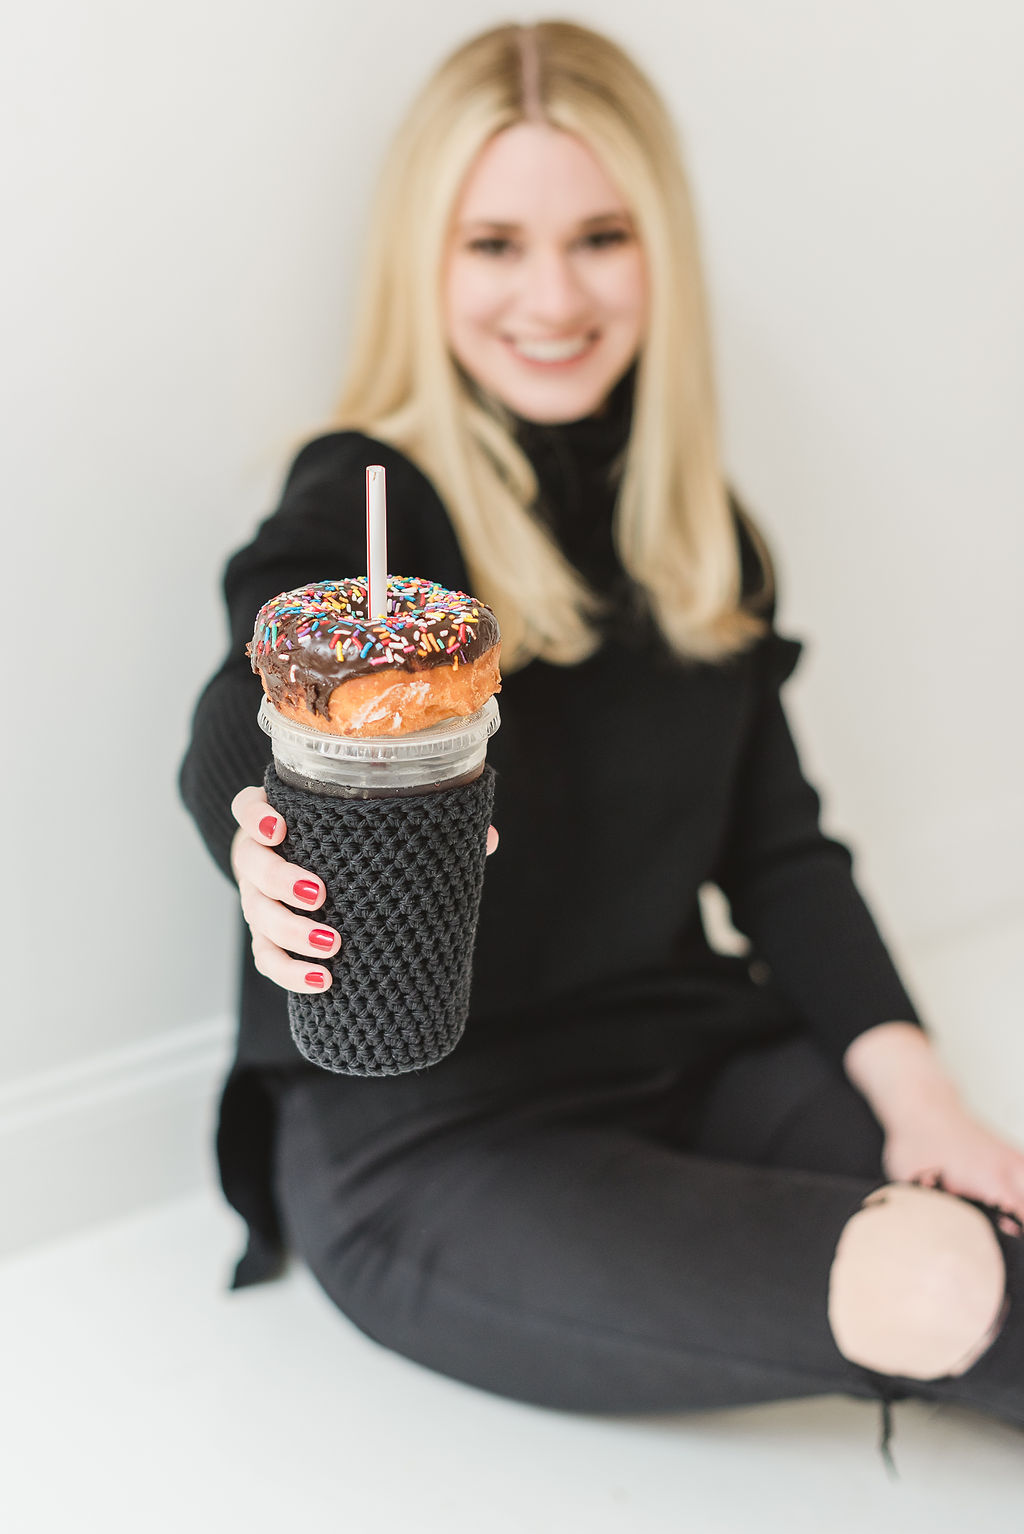 A woman with blonde hair is comfortably settled on the floor, lovingly cradling a cup shaped like a donut.